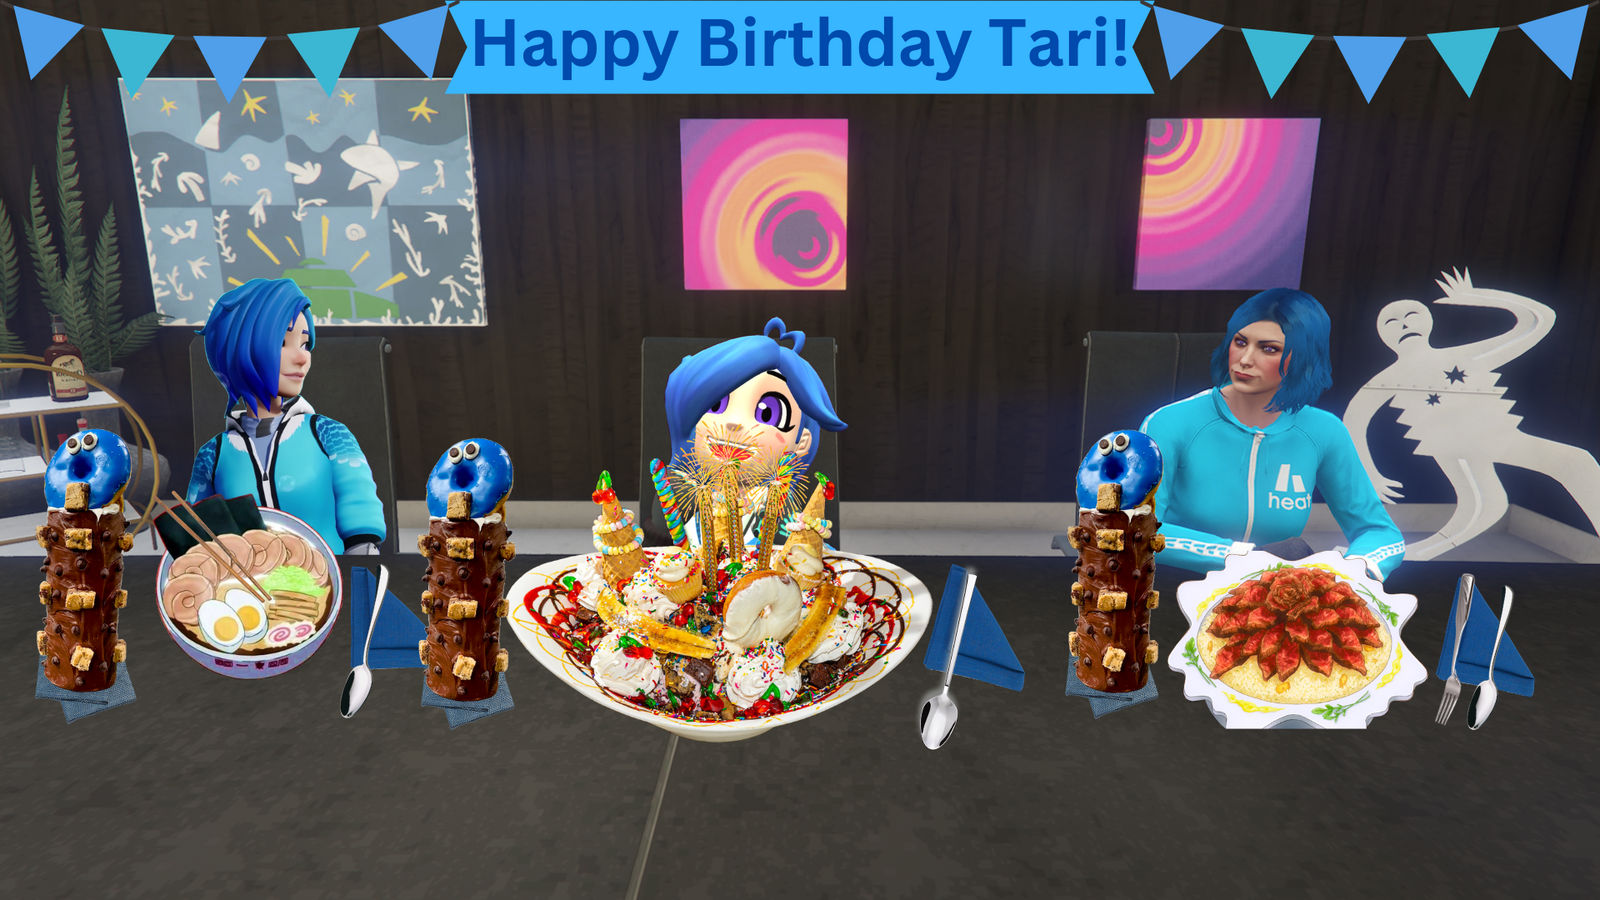 A Celebratory Tari Anniversary Feast by DipperBronyPines98 on DeviantArt